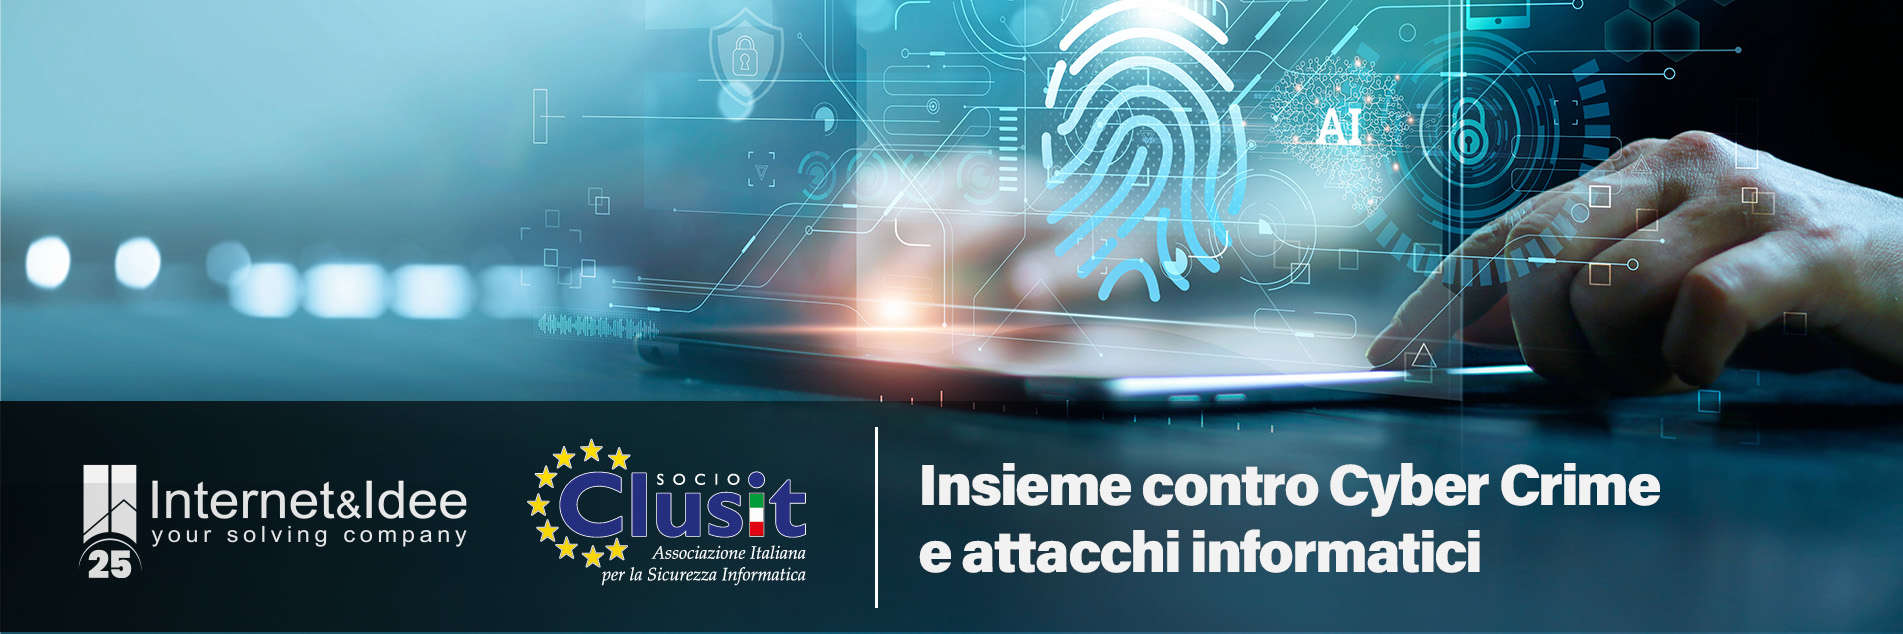 I&I become part to CLUSIT, enhancing the cyber security strategy